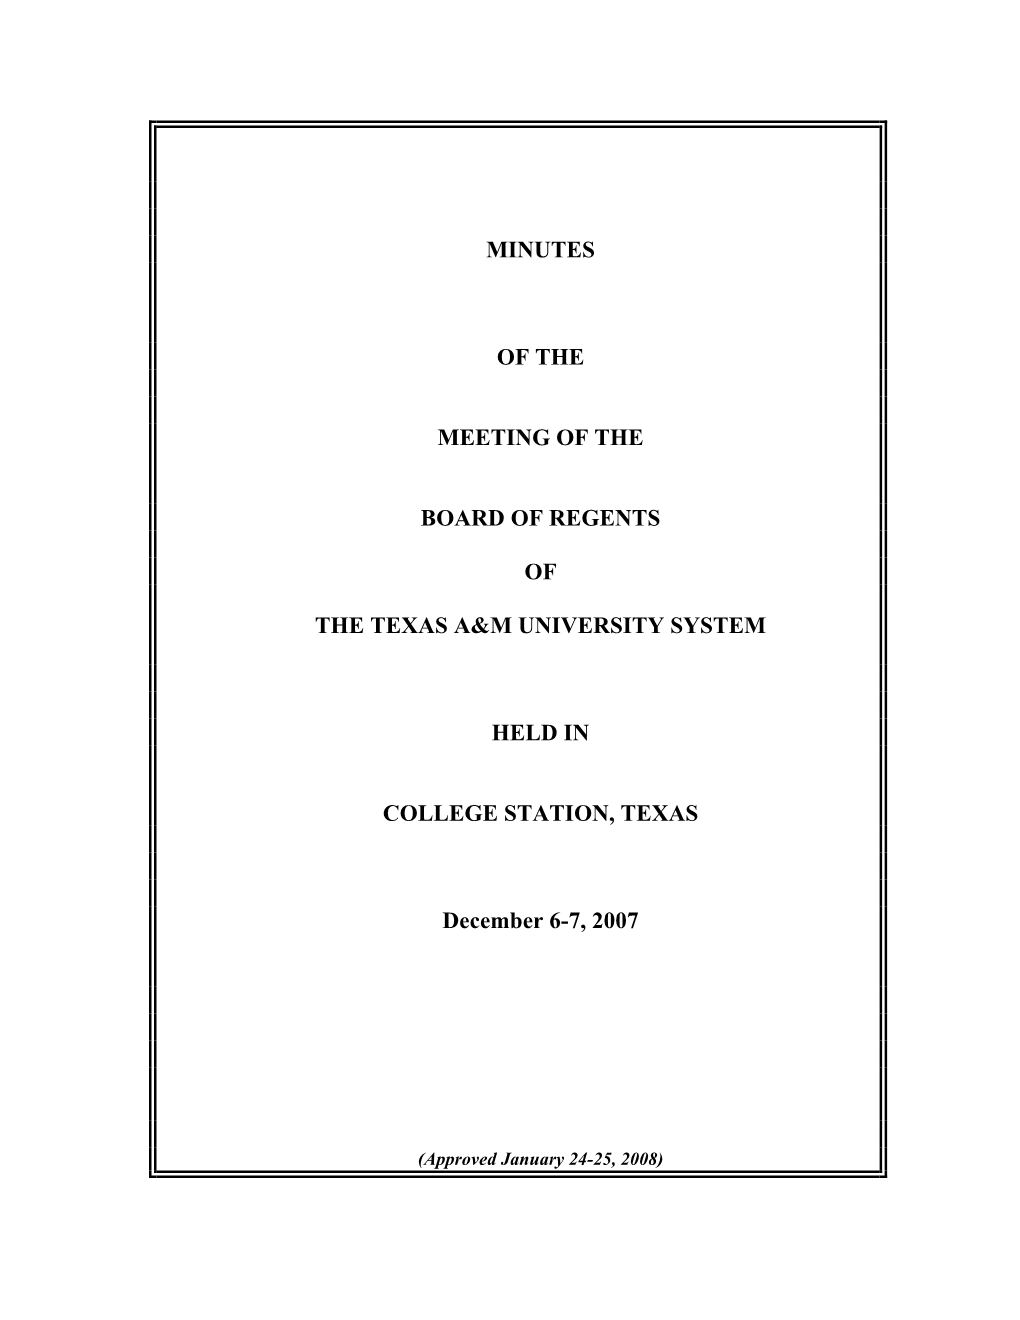 MINUTES of the MEETING of the BOARD of REGENTS of the TEXAS A&M UNIVERSITY SYSTEM HELD in COLLEGE STATION, TEXAS December 6